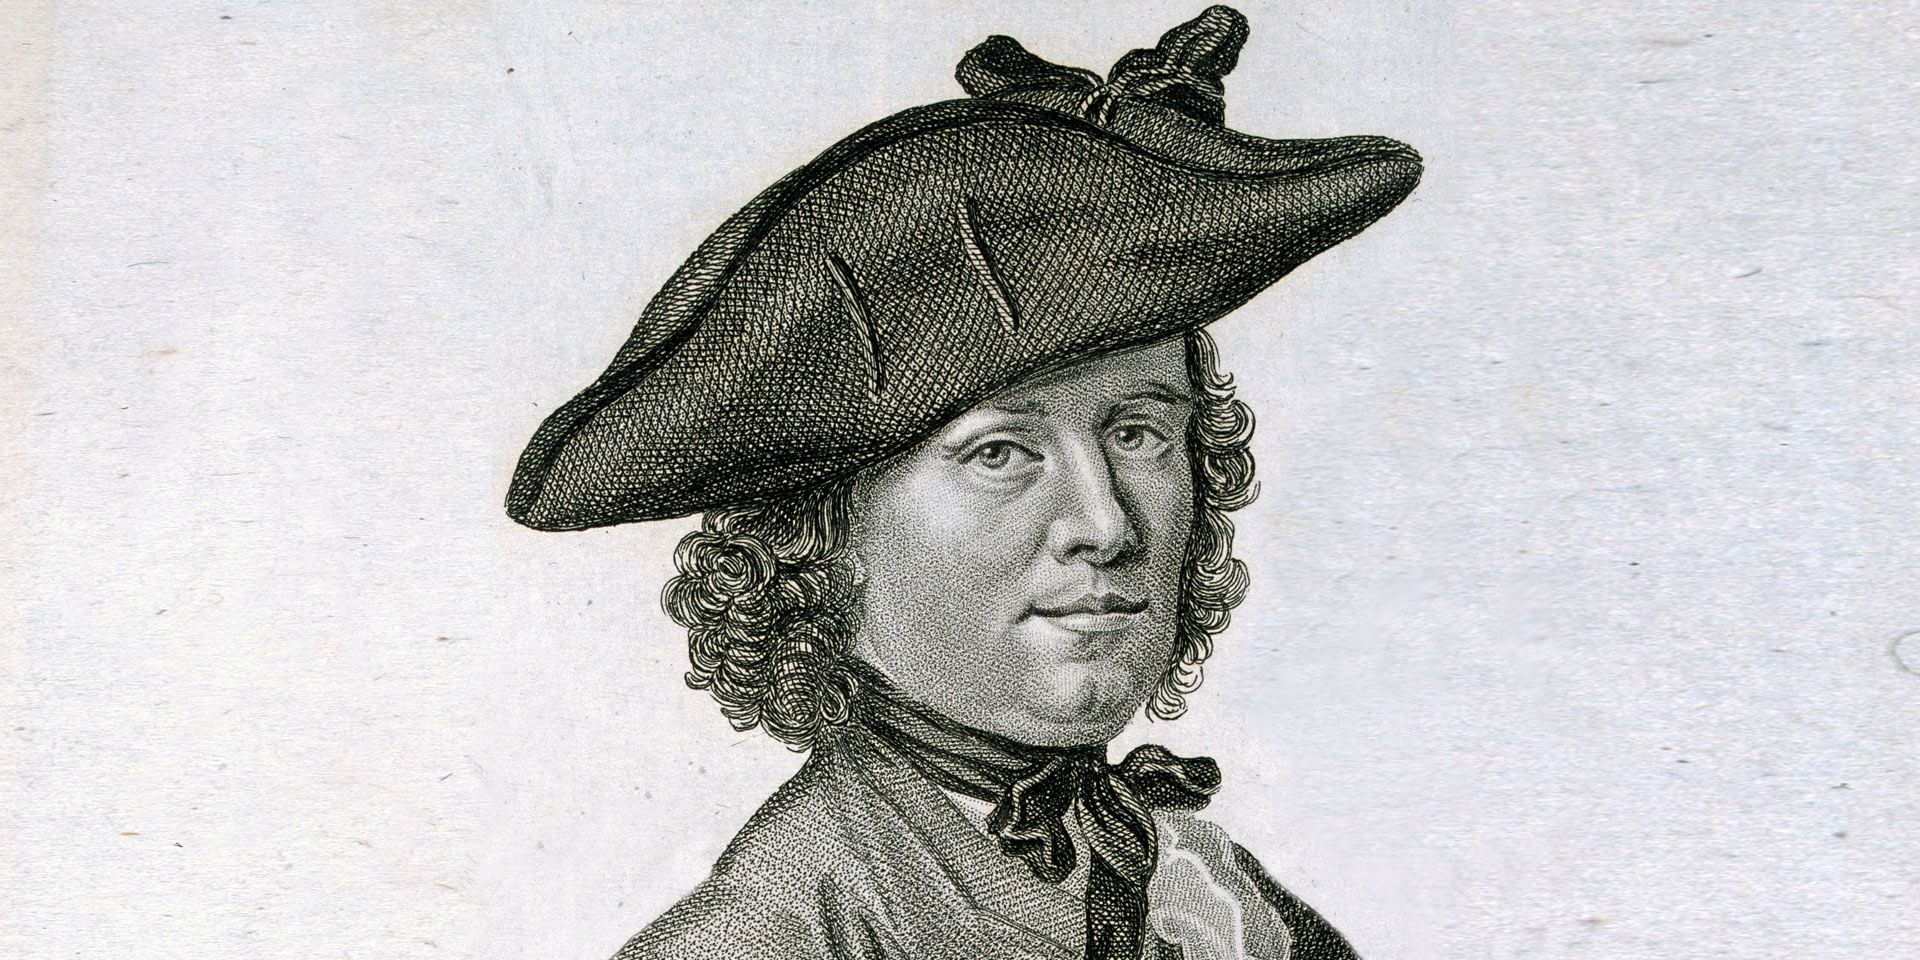 Hannah Snell, The Female Soldier, c1750 